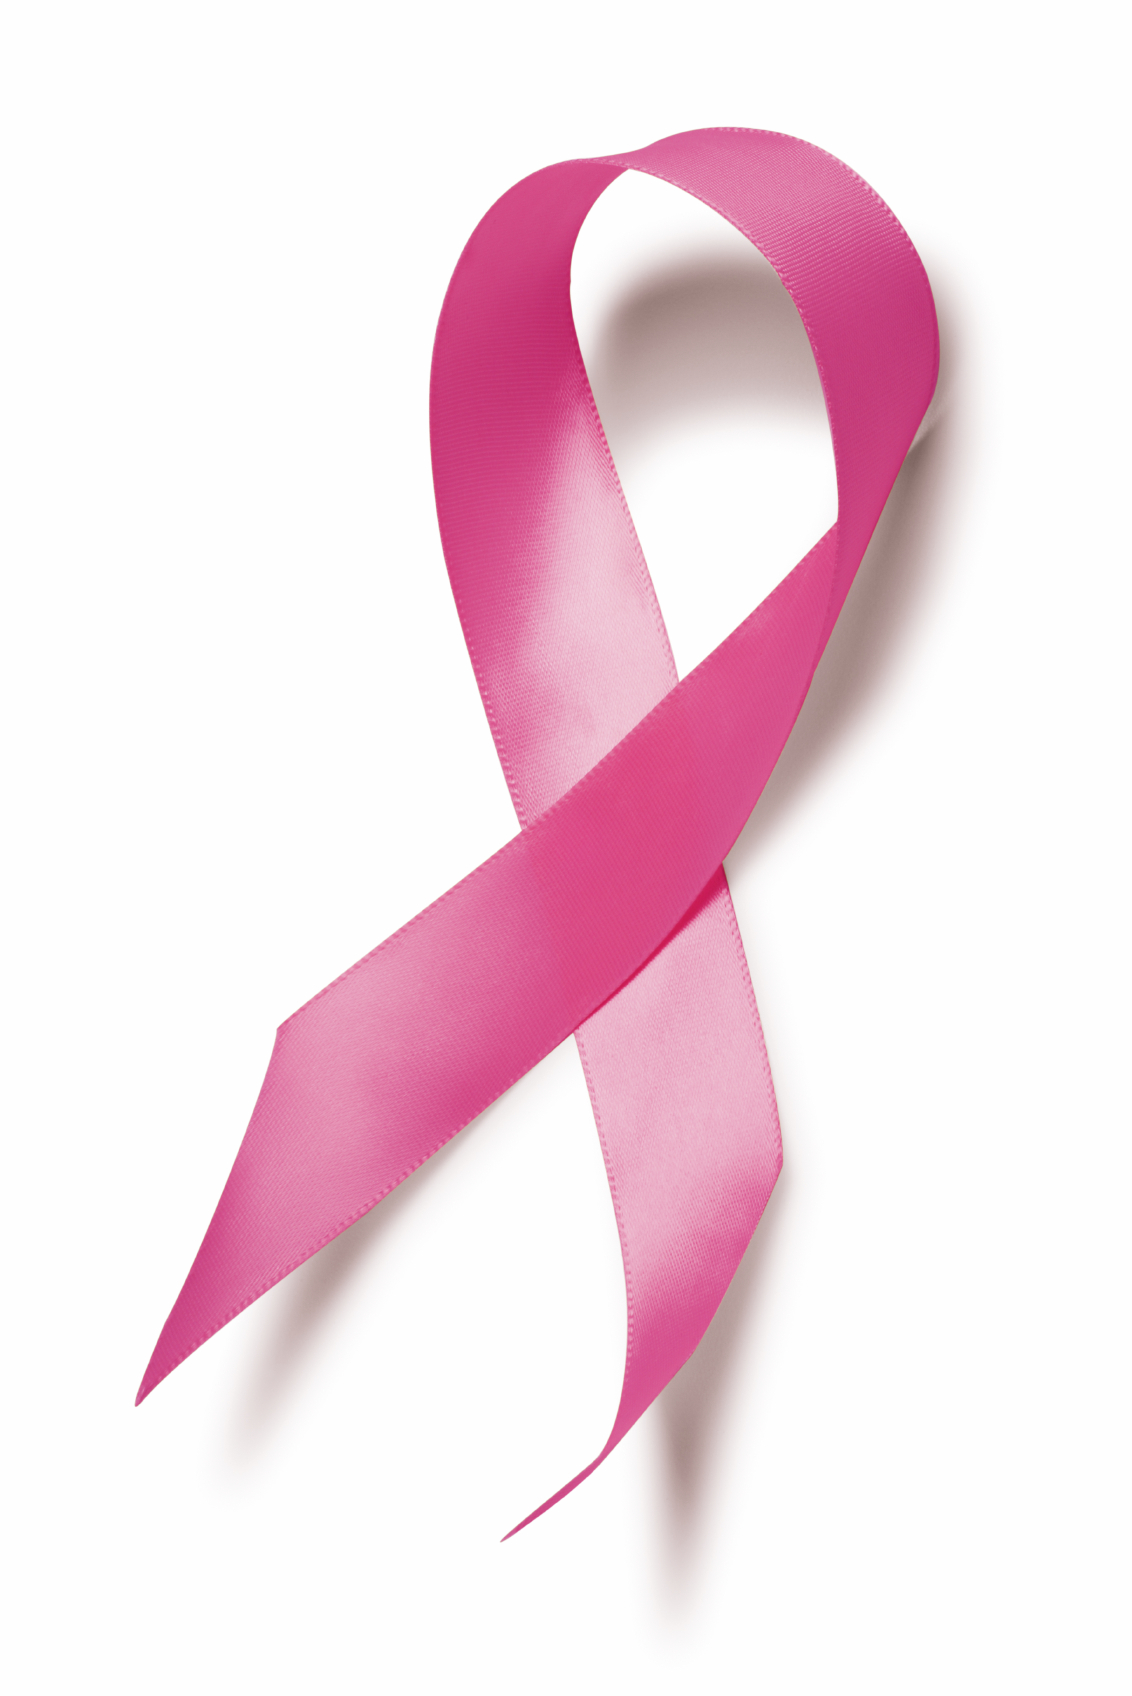 Breast Cancer Ribbon Png - ClipArt Best